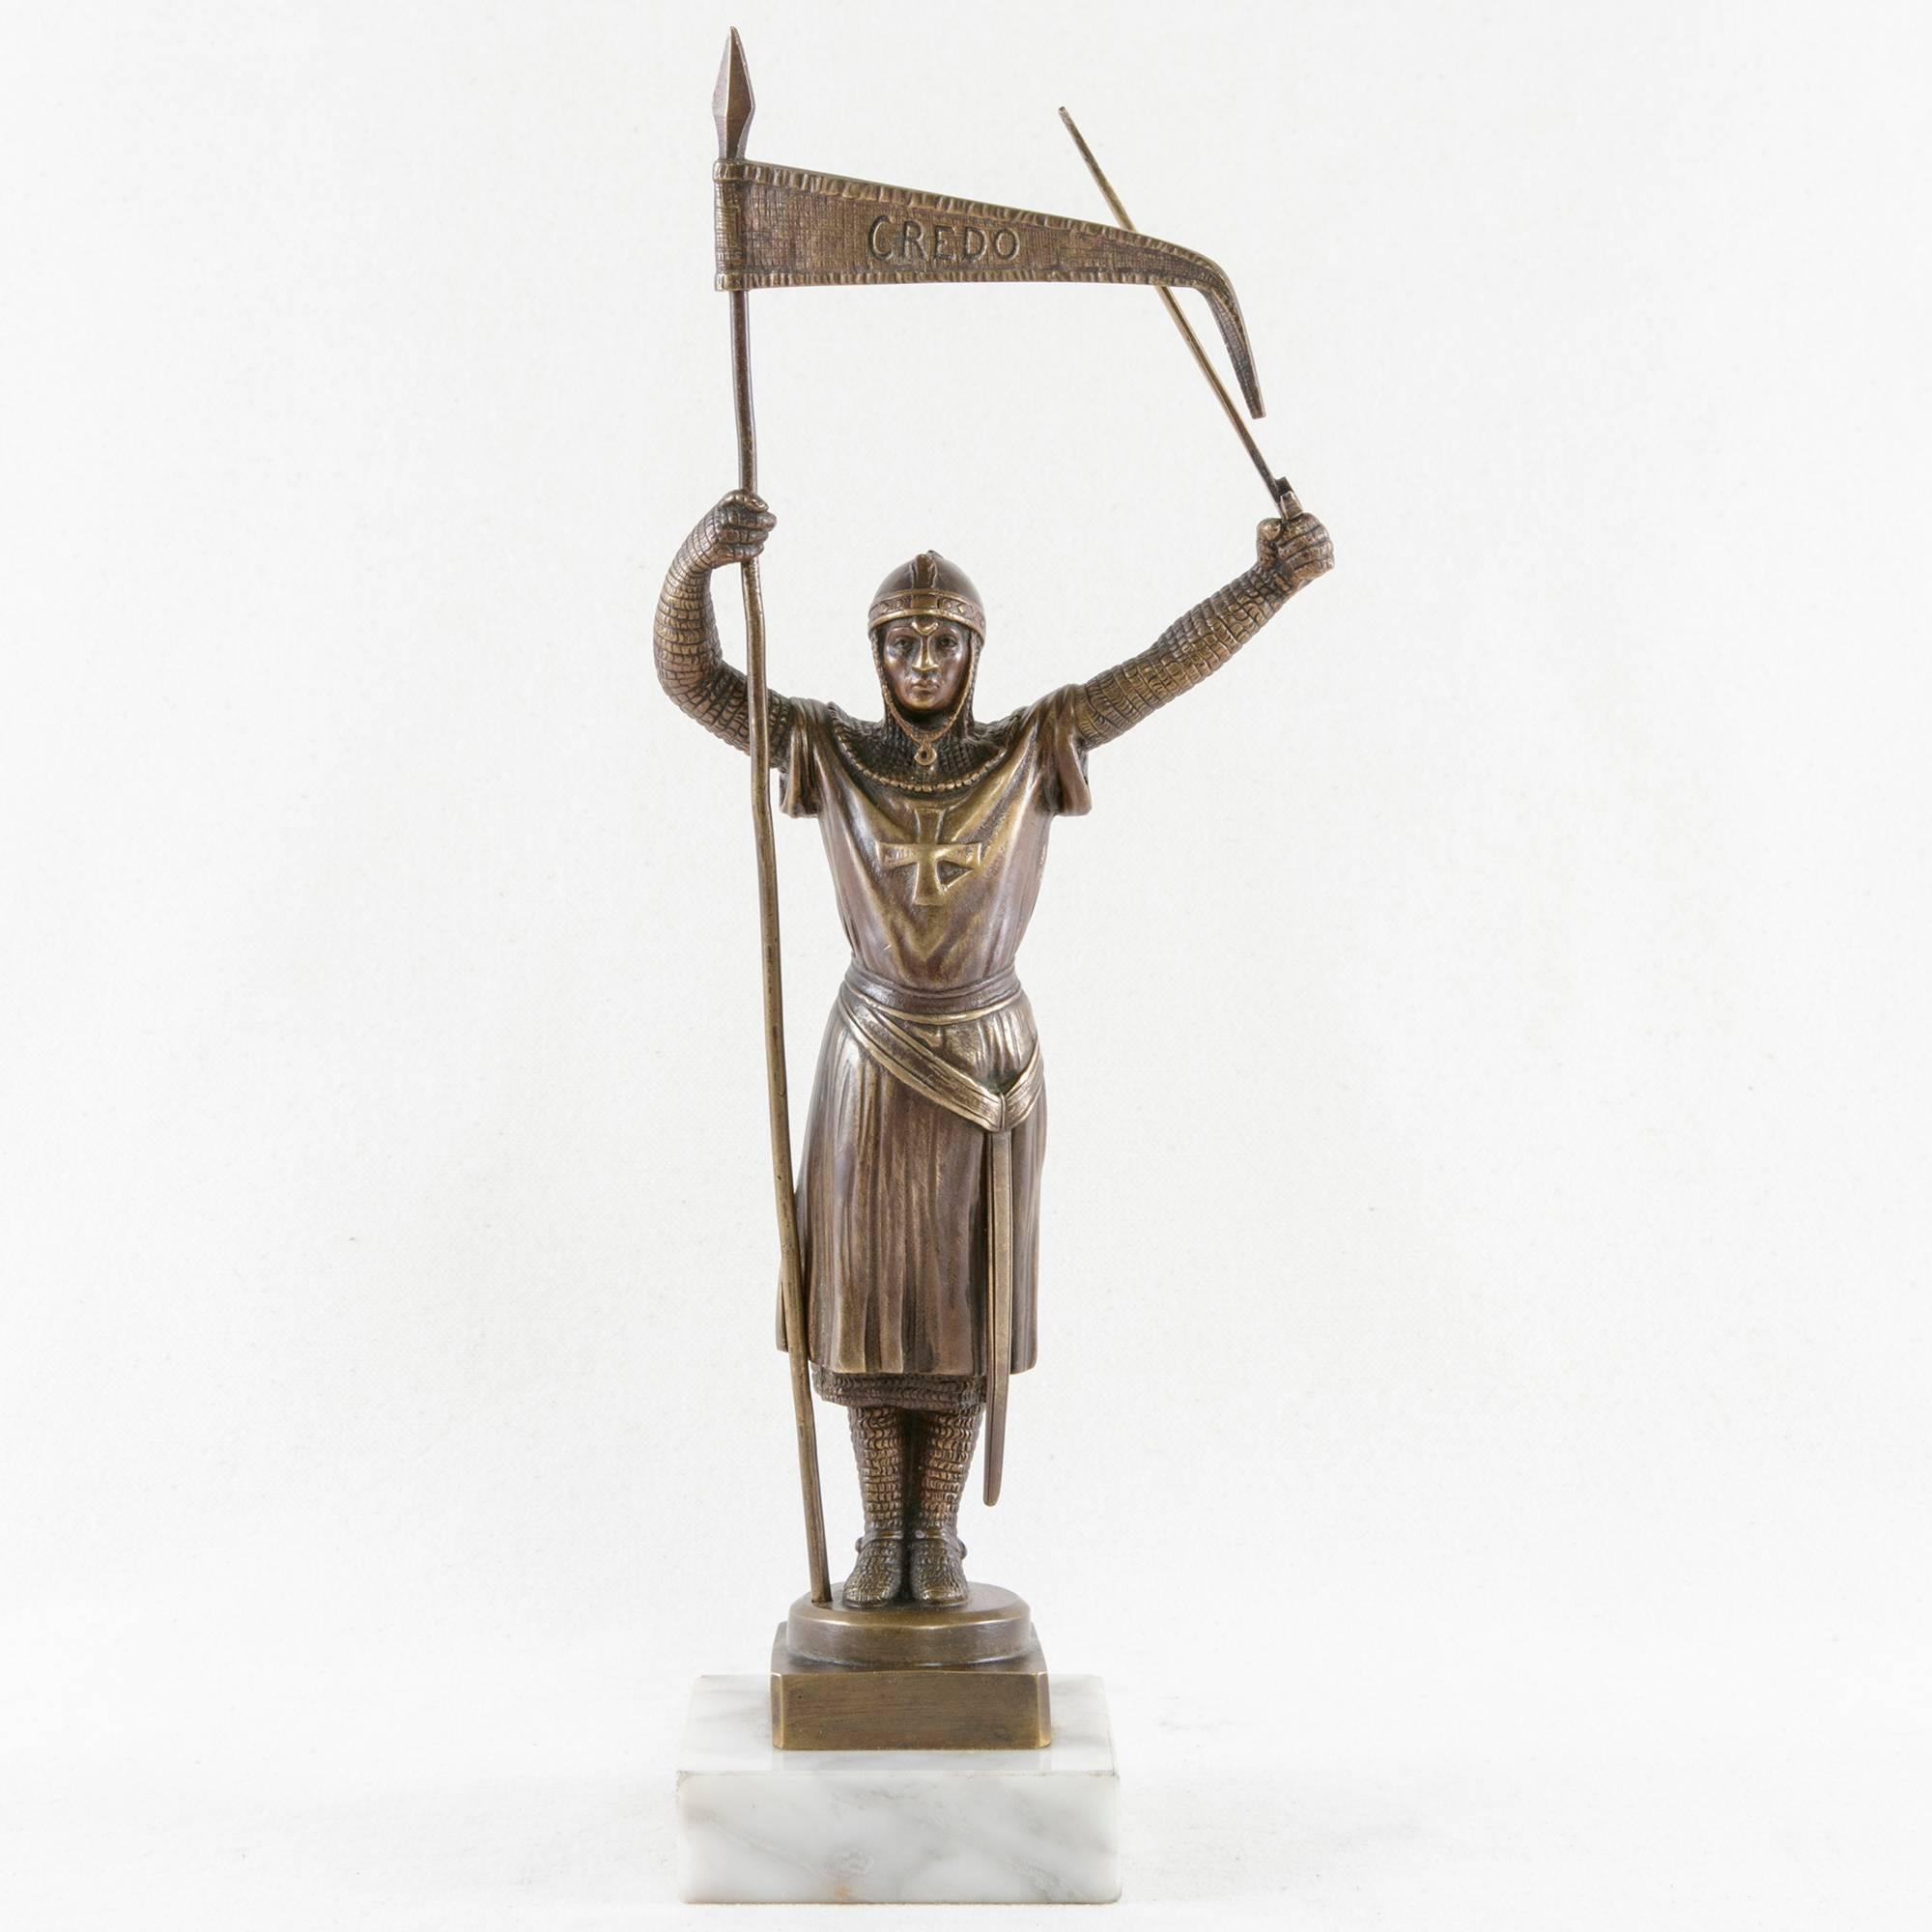 Standing triumphantly atop a white marble base, this Art Deco period bronze crusader of the Order of the Knights Templar holds aloft a sword in one hand and a pennant in the other. Written across the face of his banner is the Latin word Credo